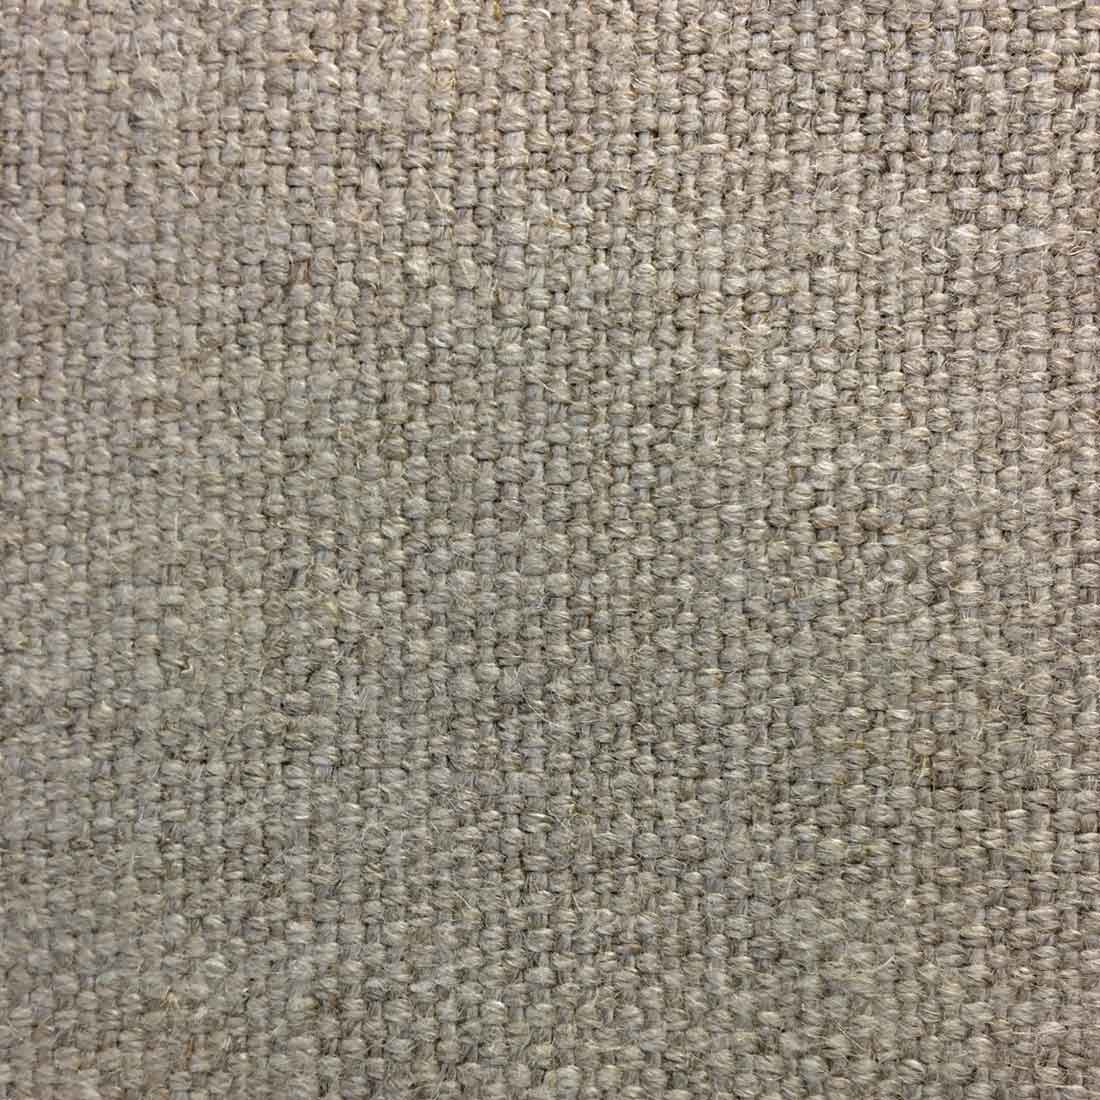 125 Classic Loomstate Linen Rough - Per Metre